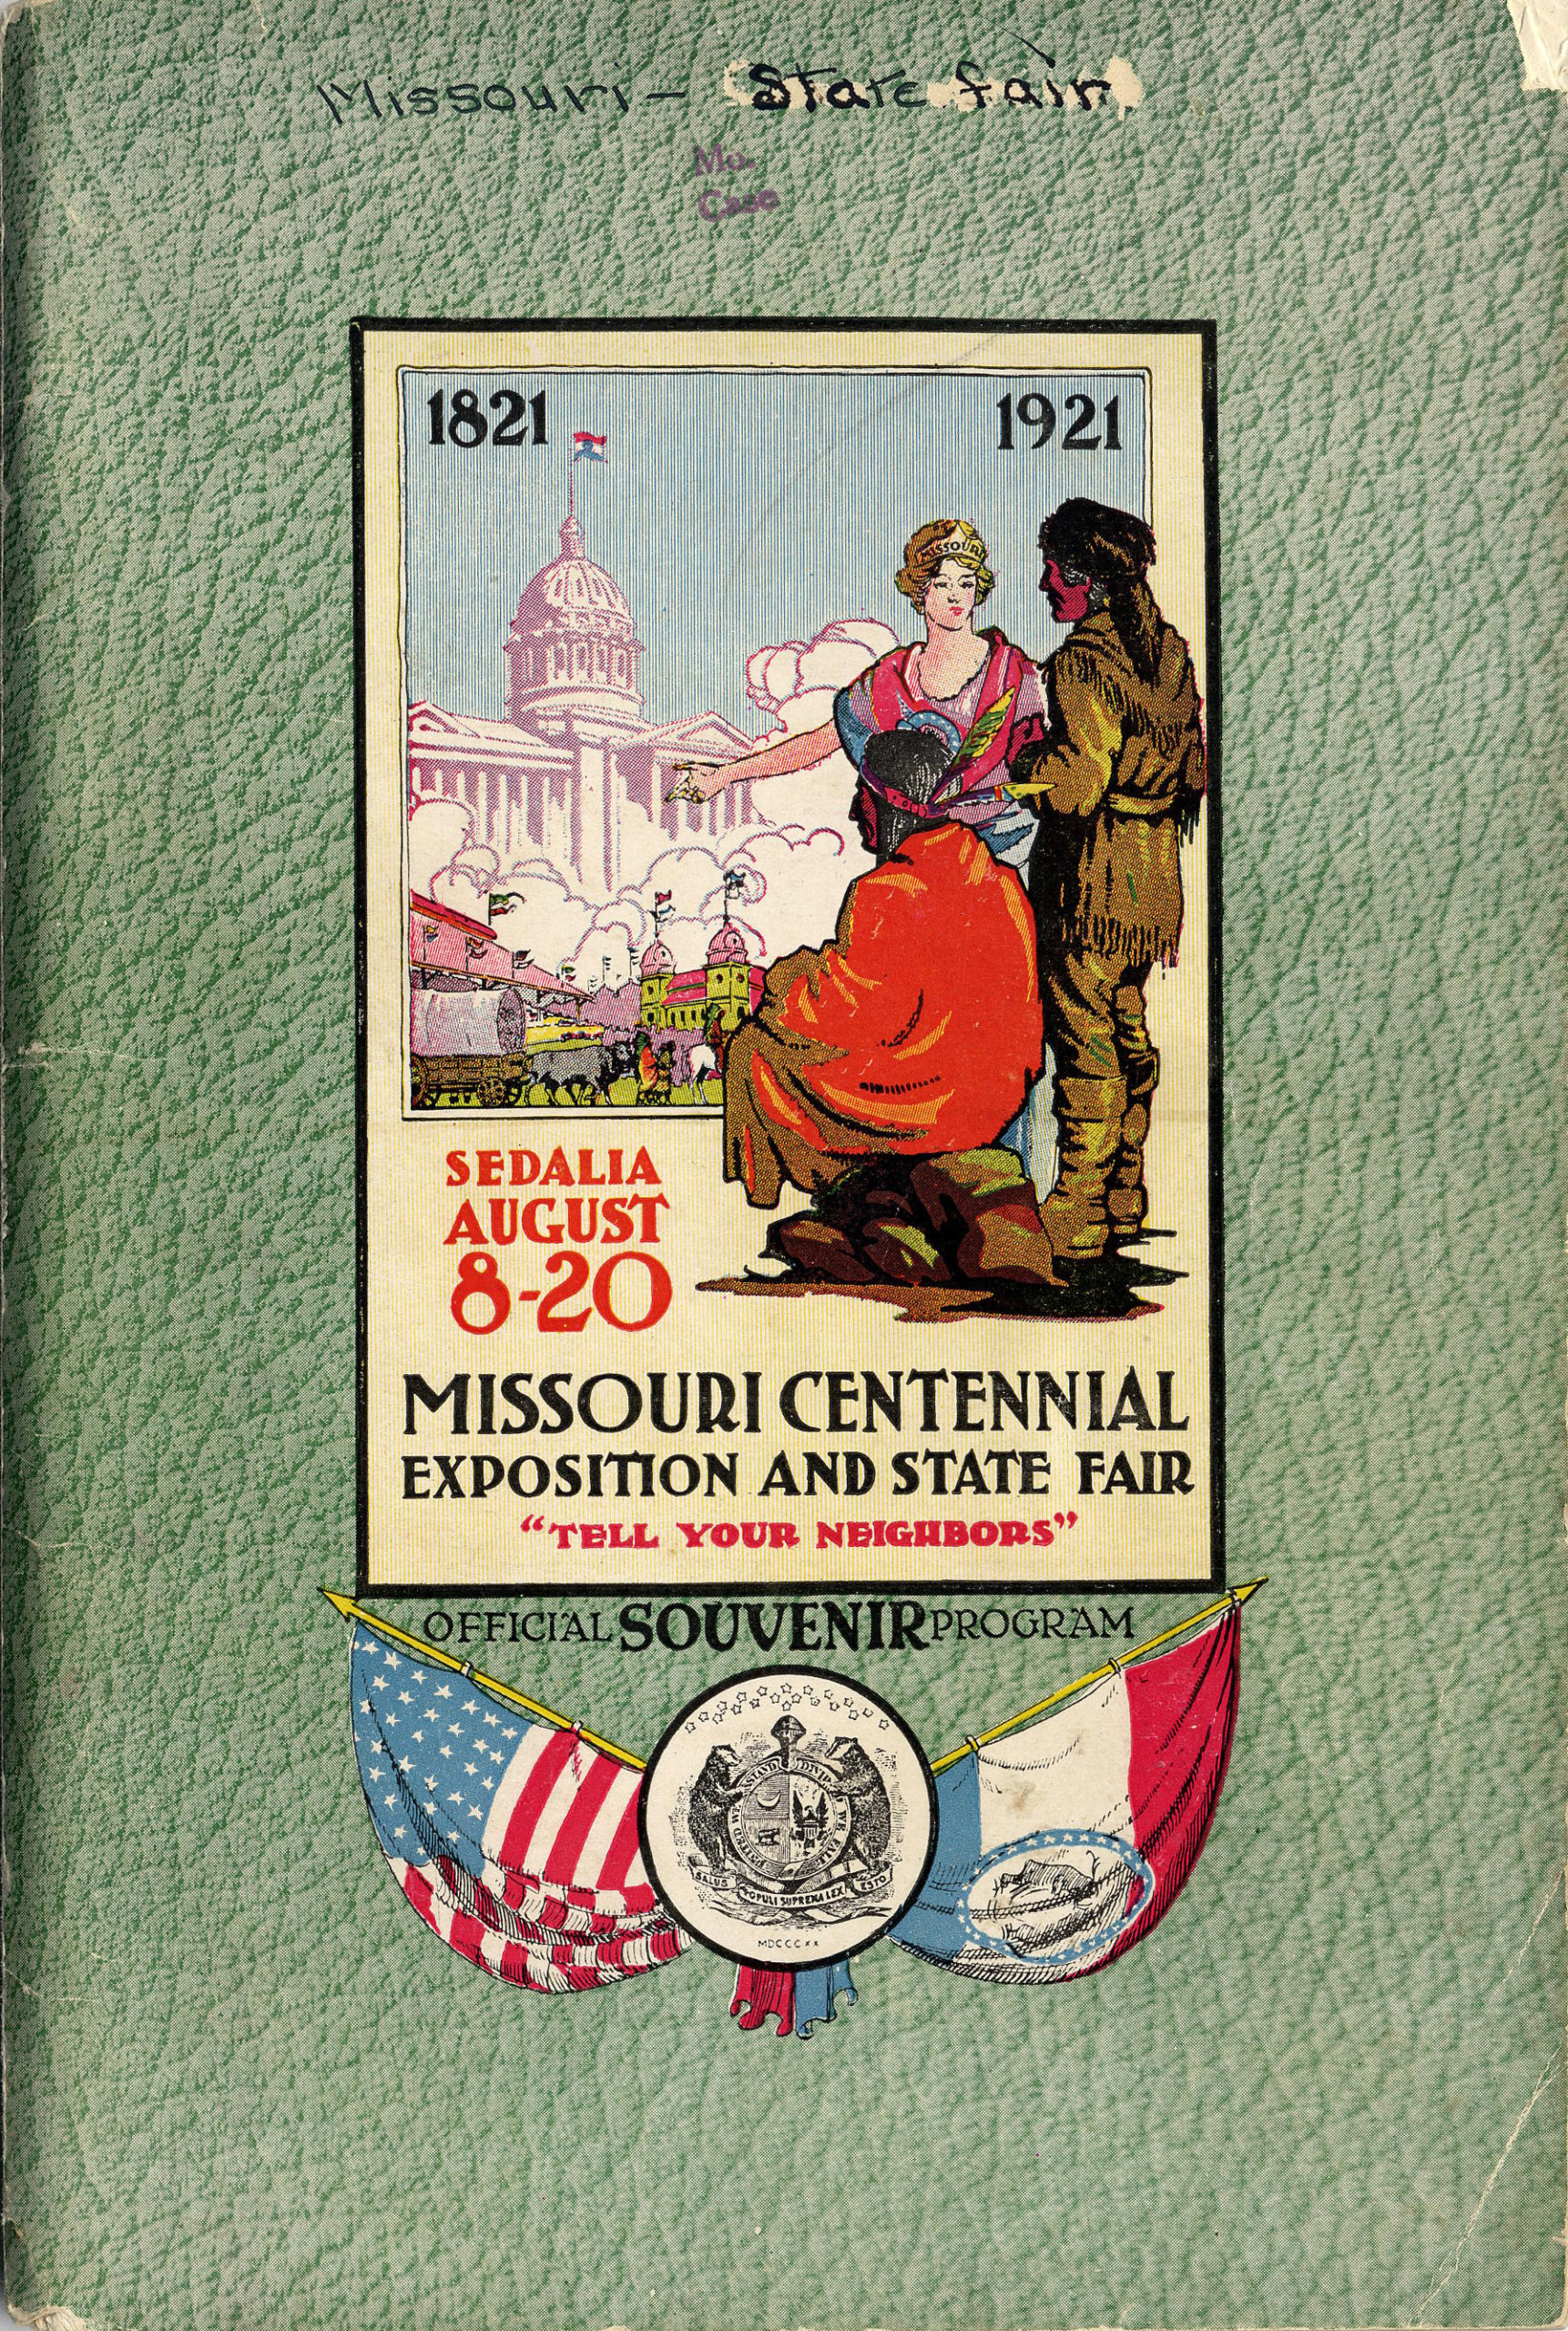 The cover for the Official Souvenir Program of 1921 Missouri Centennial Exposition and State Fair. (MISSOURI STATE ARCHIVES)